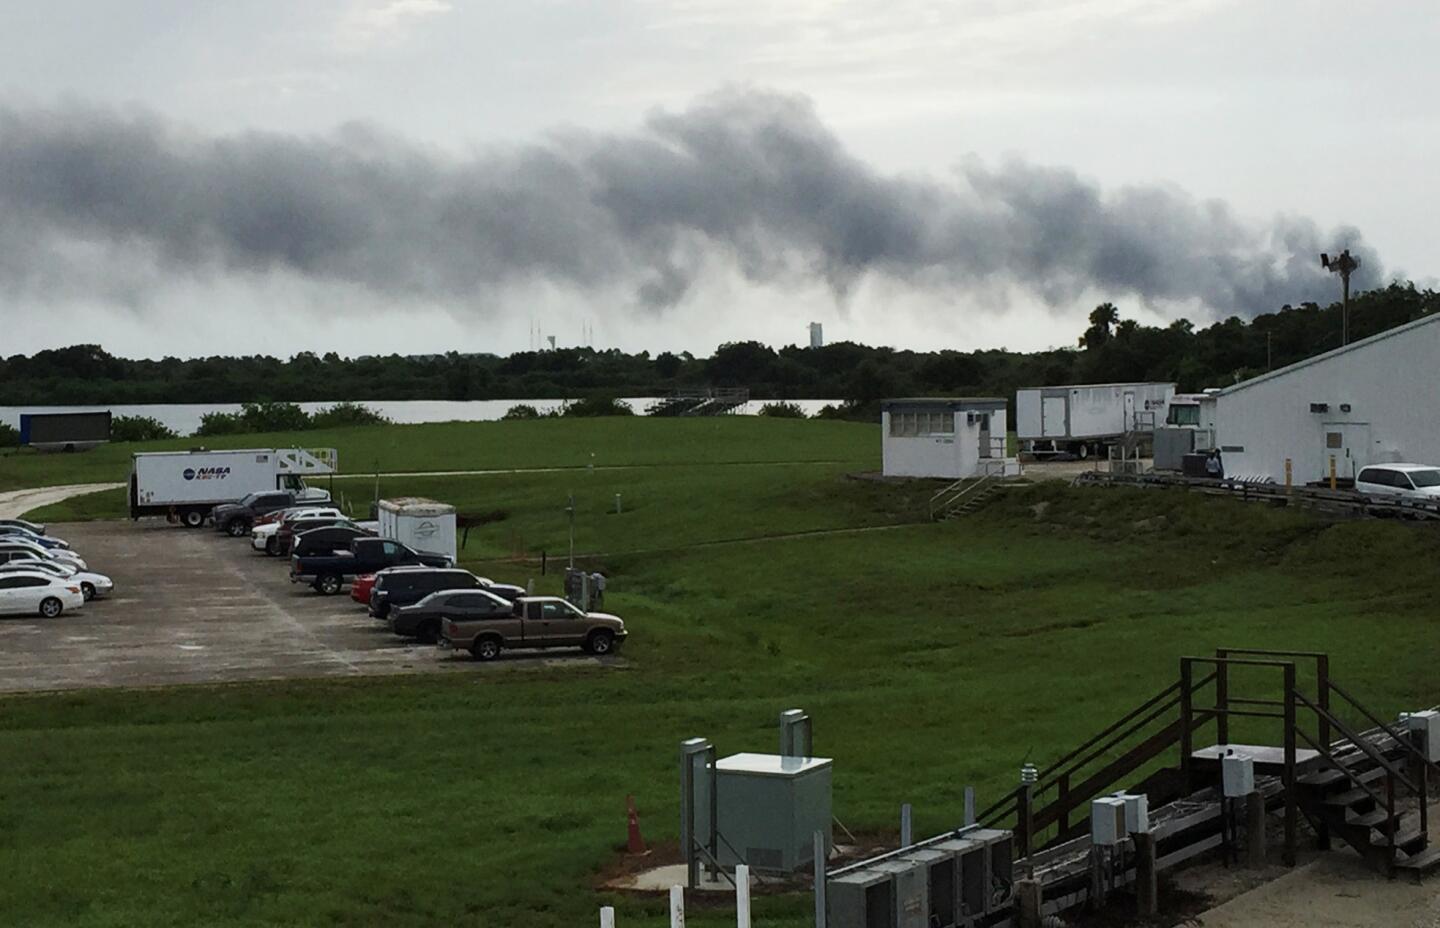 SpaceX Falcon 9 rocket explodes during test firing